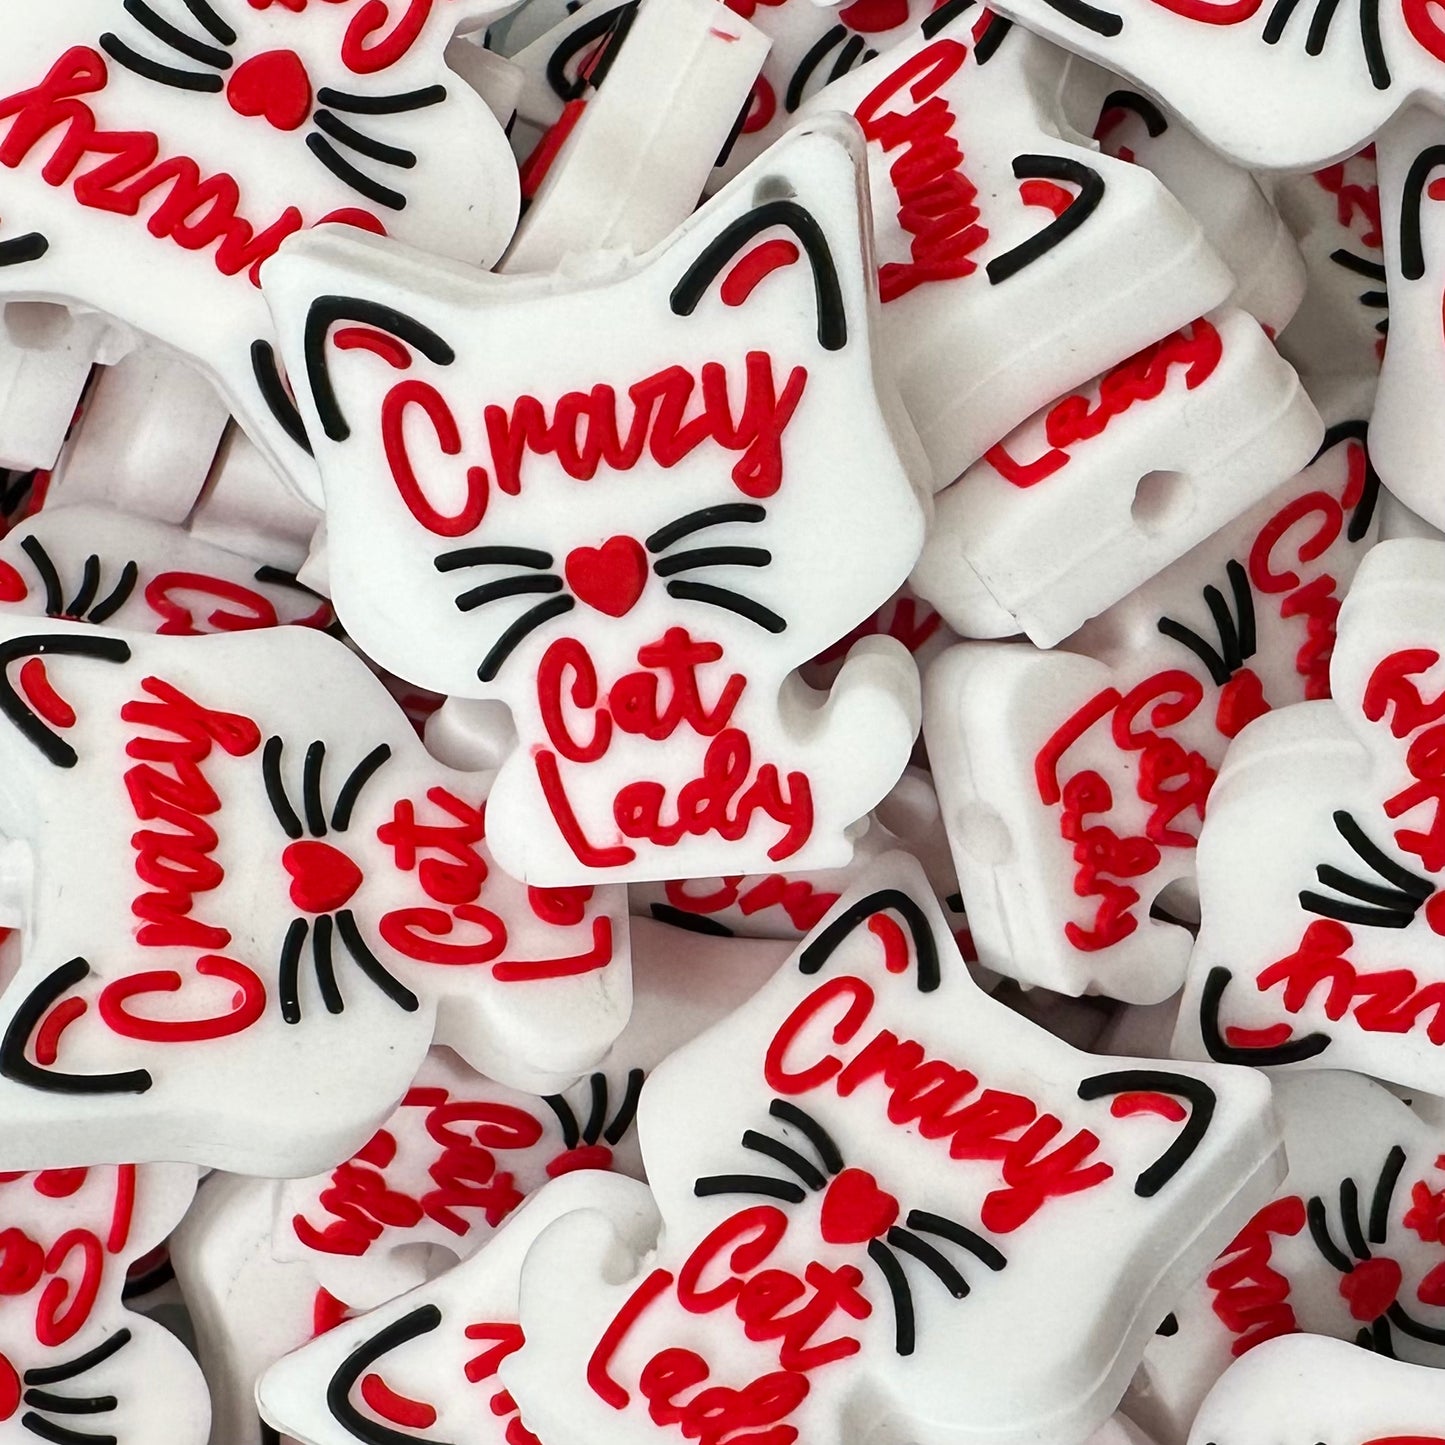 Focal Bead, Crazy Cat Lady-Red on White